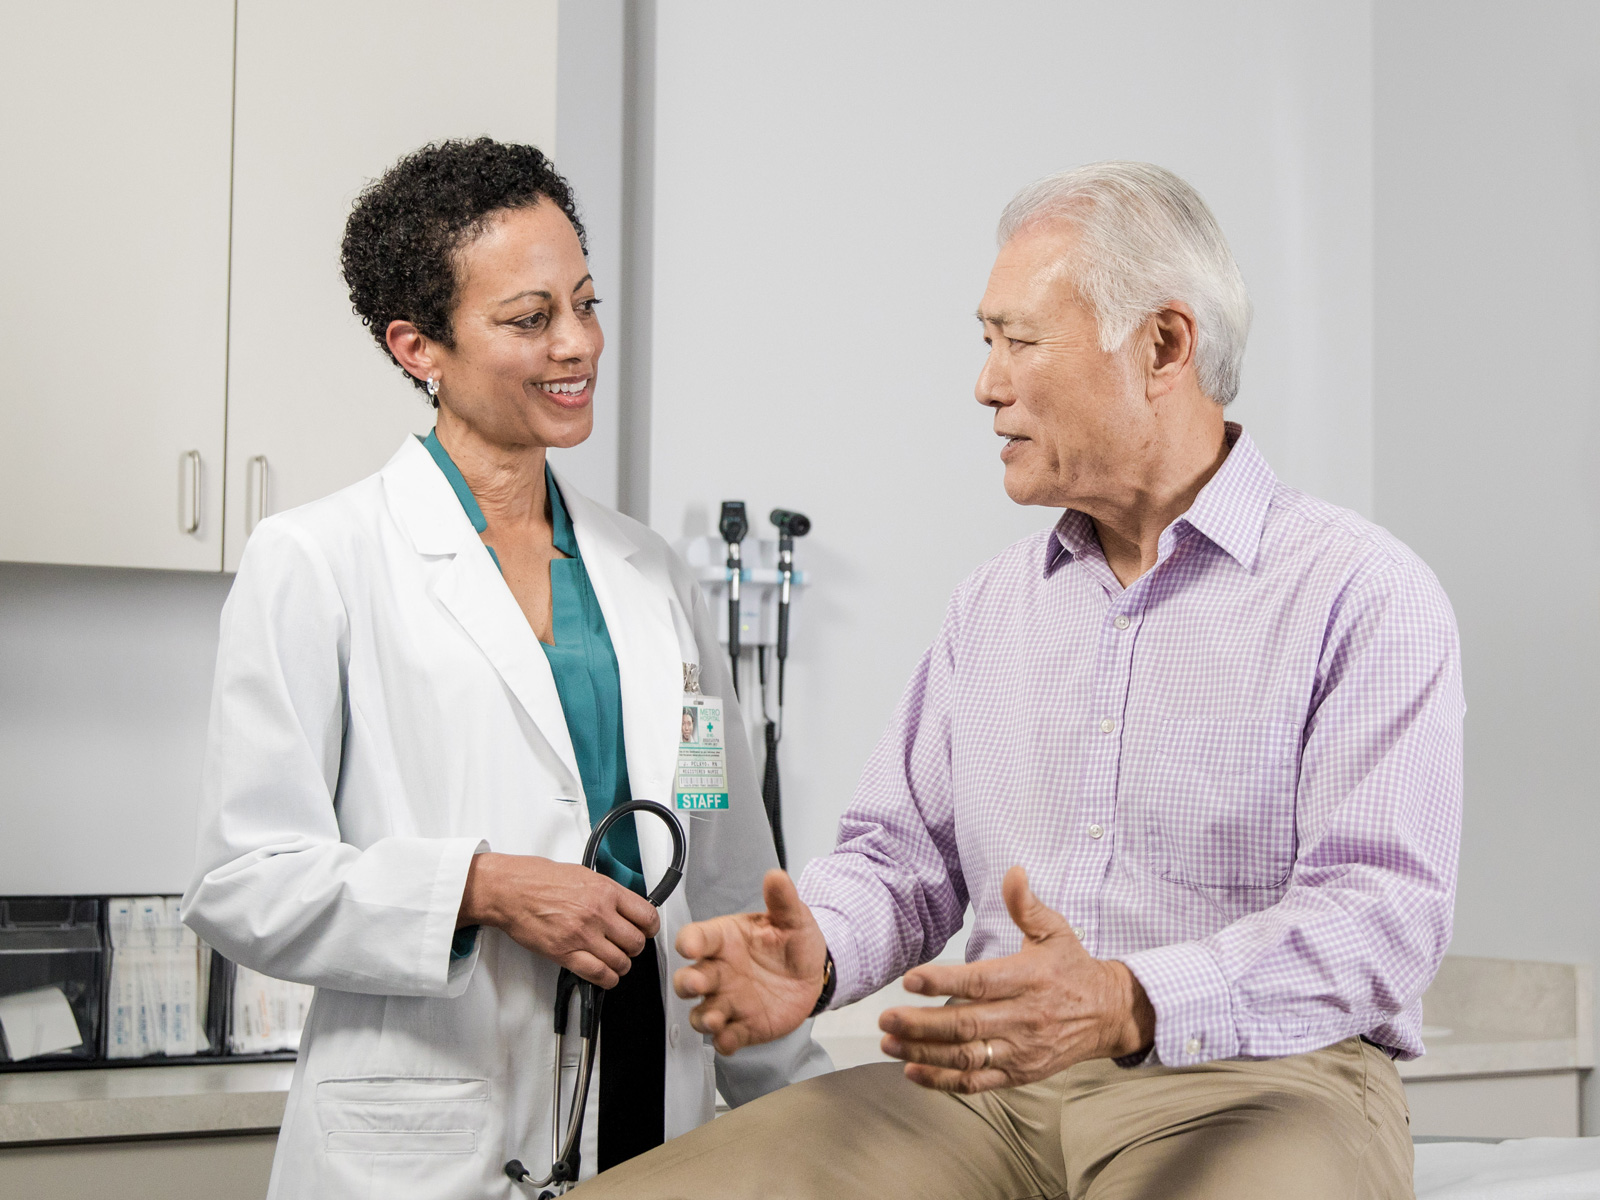 A doctor holding a stethoscope consults her older male patient in an exam room.